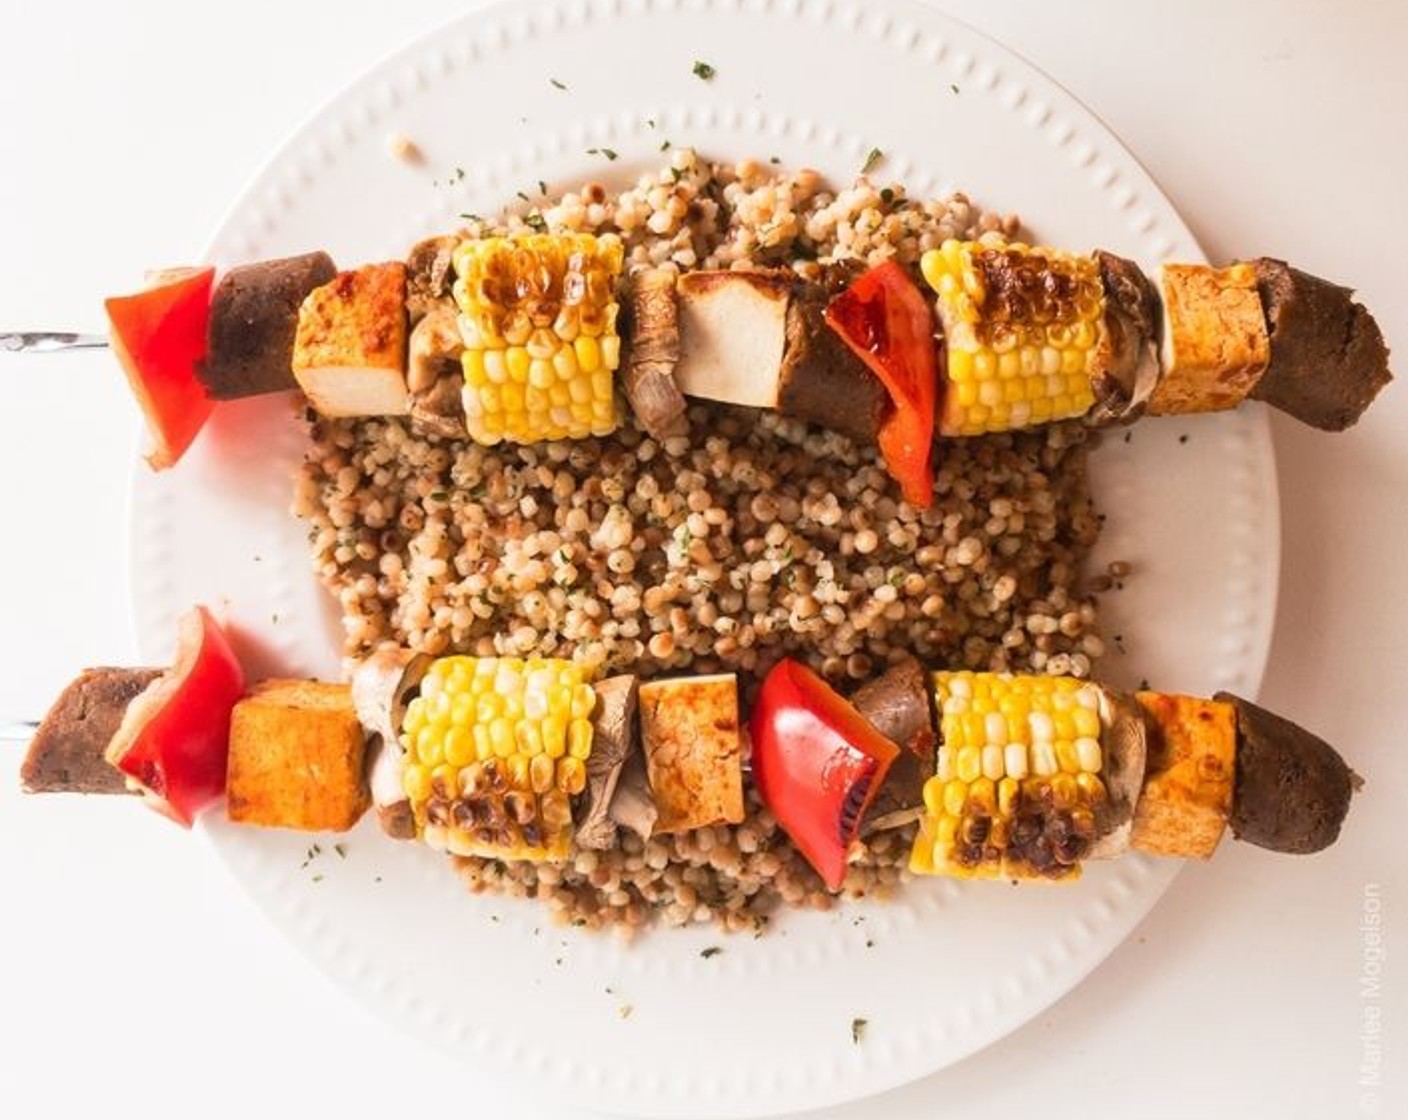 step 4 Add 3 pieces of Tofu (1 pckg), 3 pieces of Vegetarian Italian Sausage (1), 2 corn pieces, Onion (1/2 cup), and Mushroom (1/2 cup) as desired to each skewer. Cook on an outdoor or indoor grill, in a broiler, or in a pan until done, rotating as needed.